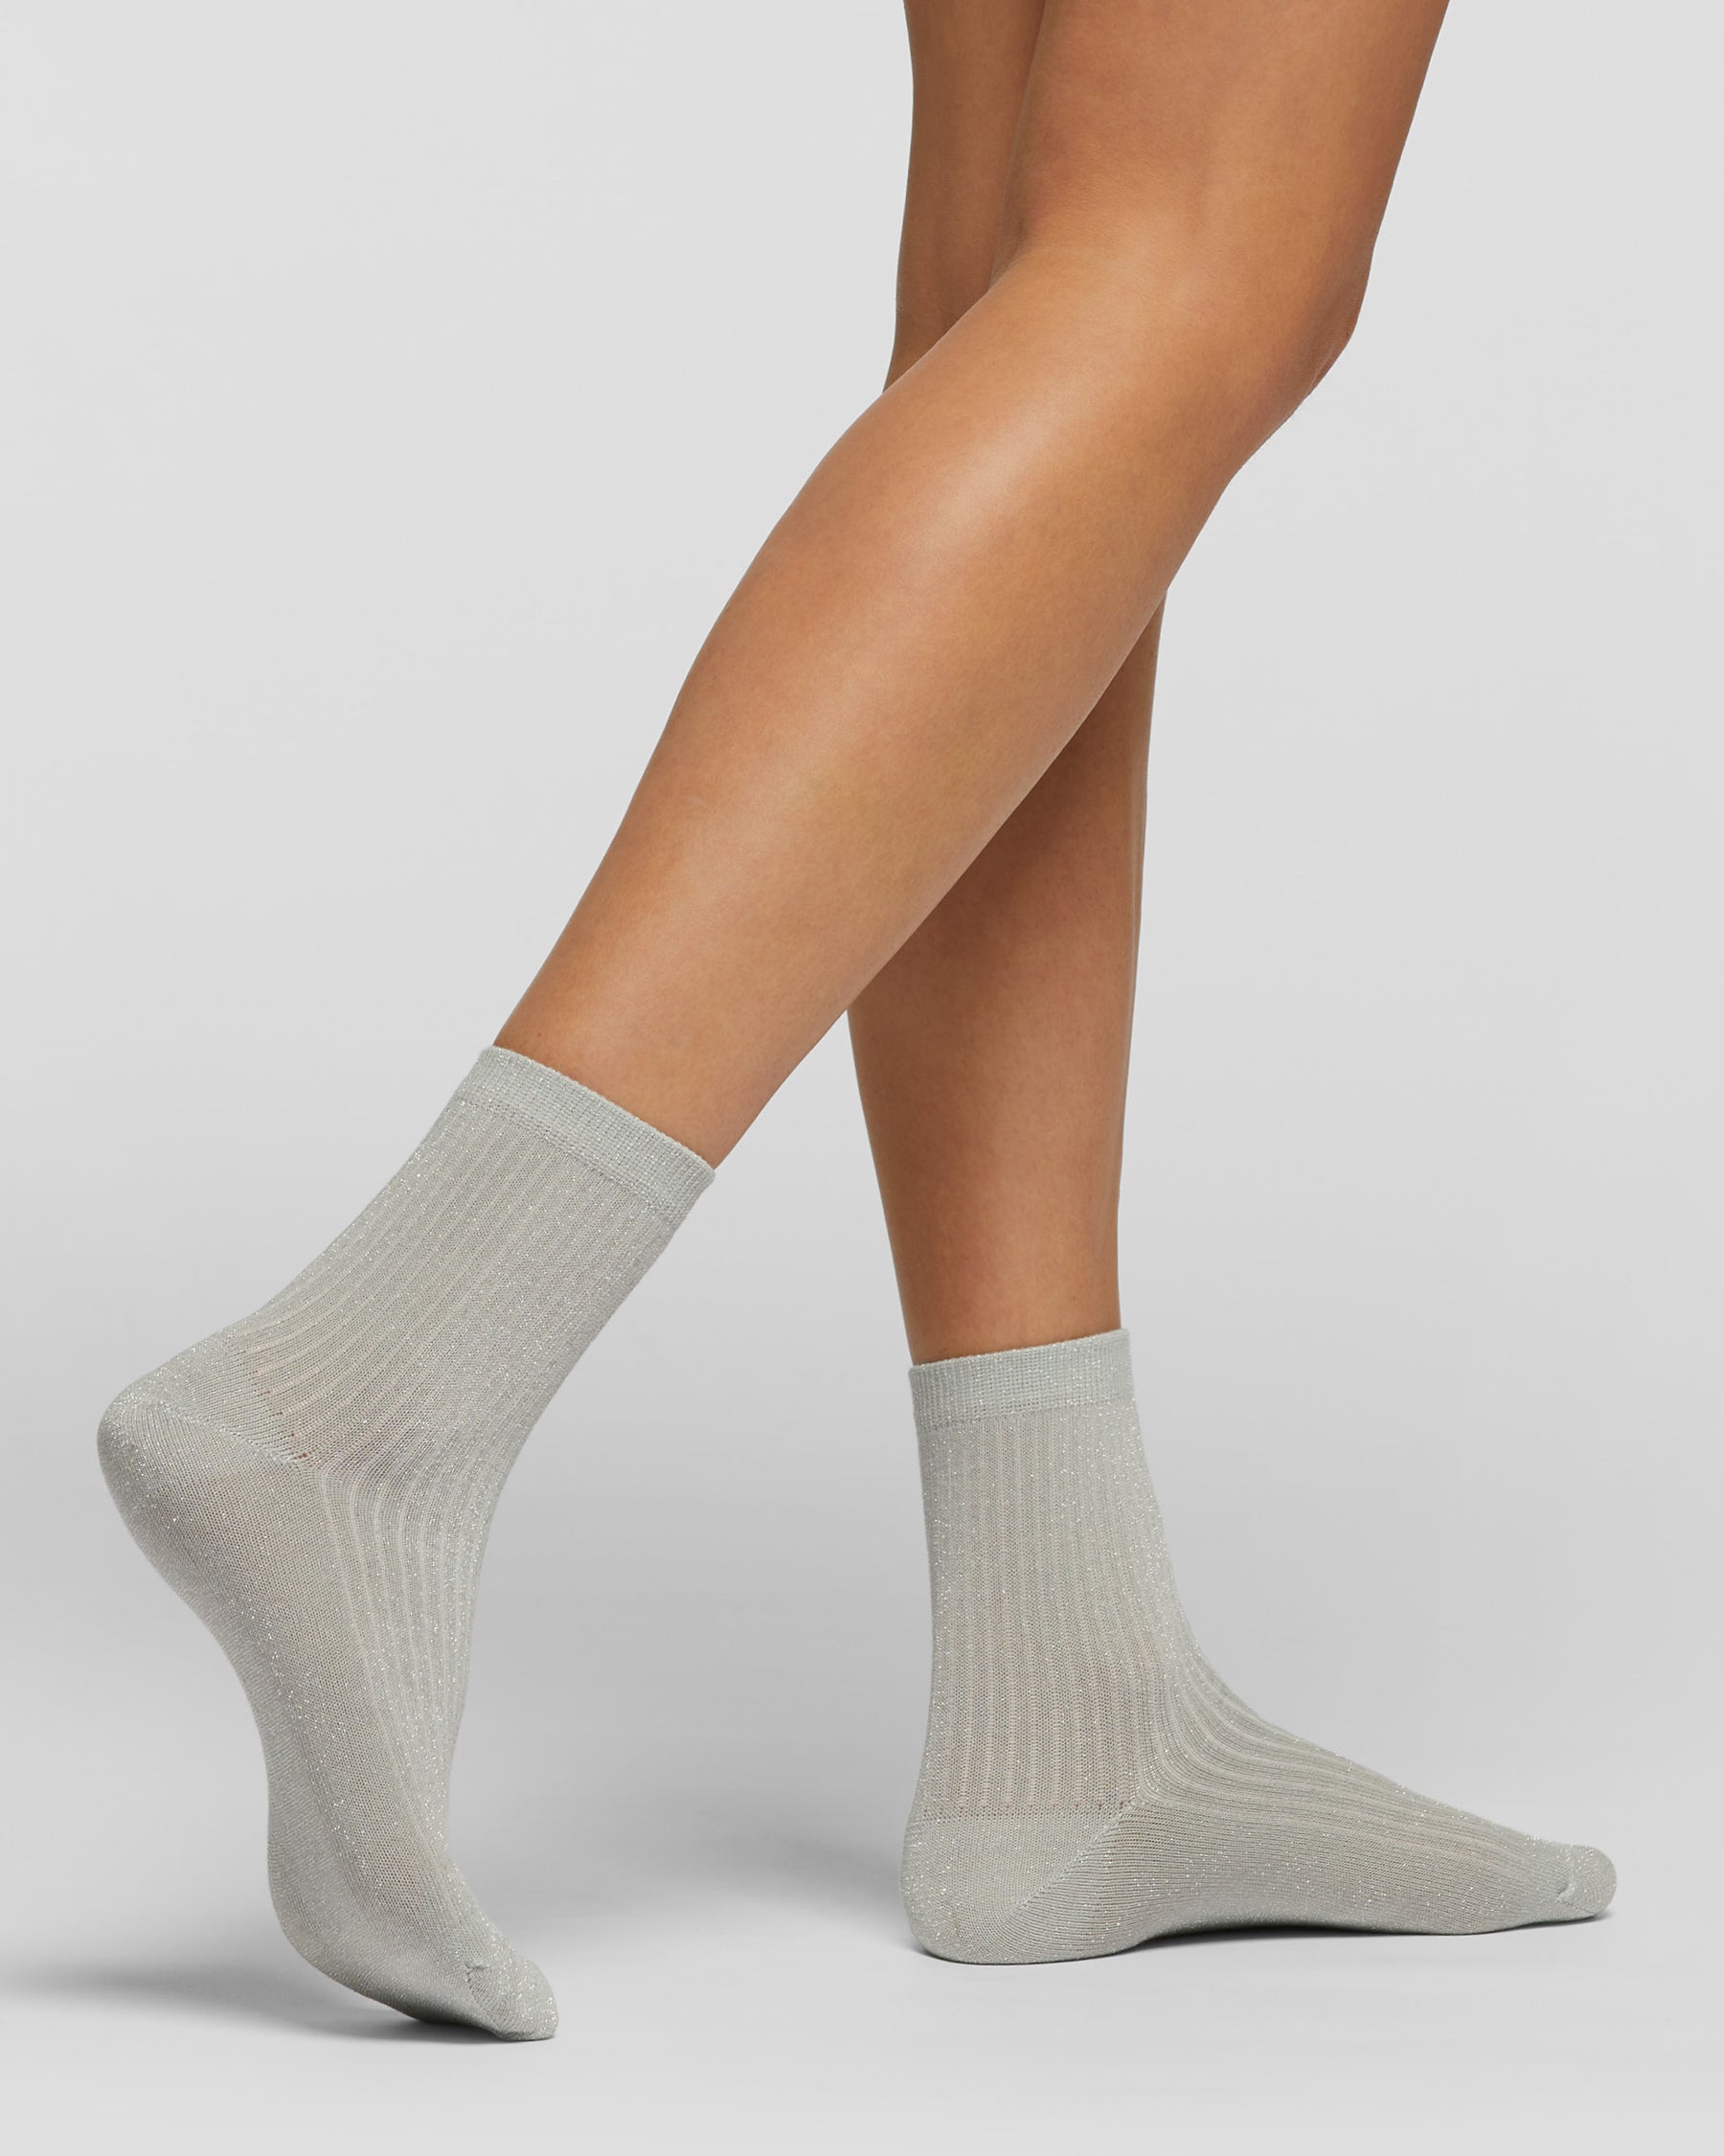 Domobianca cotton ribbed socks with lamé